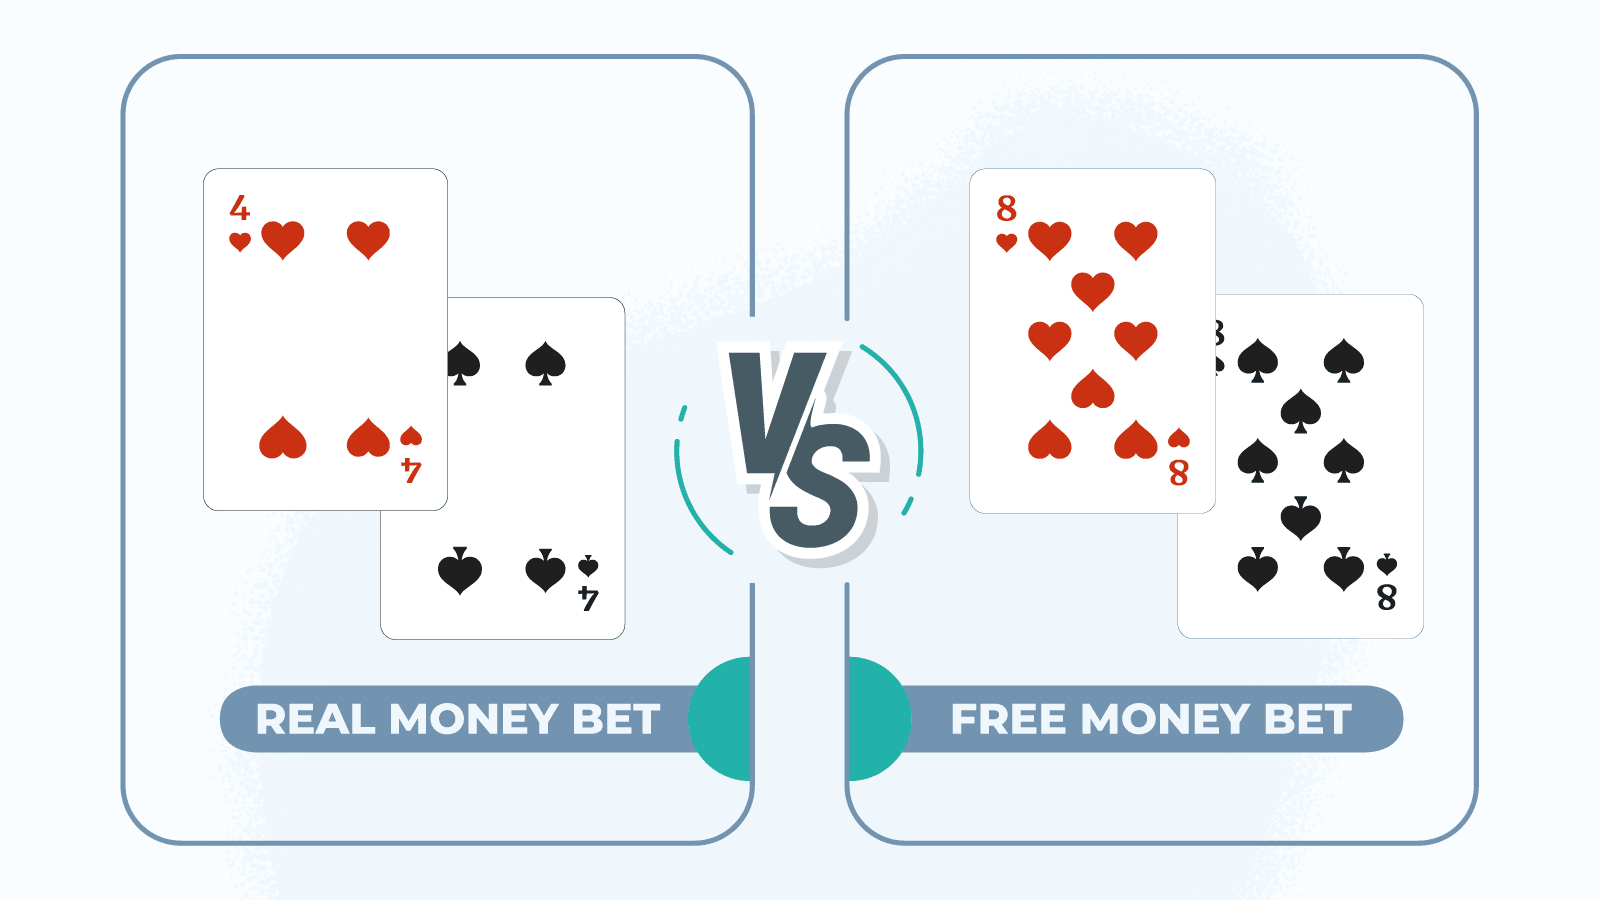 Main Difference Between Real Money Bet and Free Money Bet